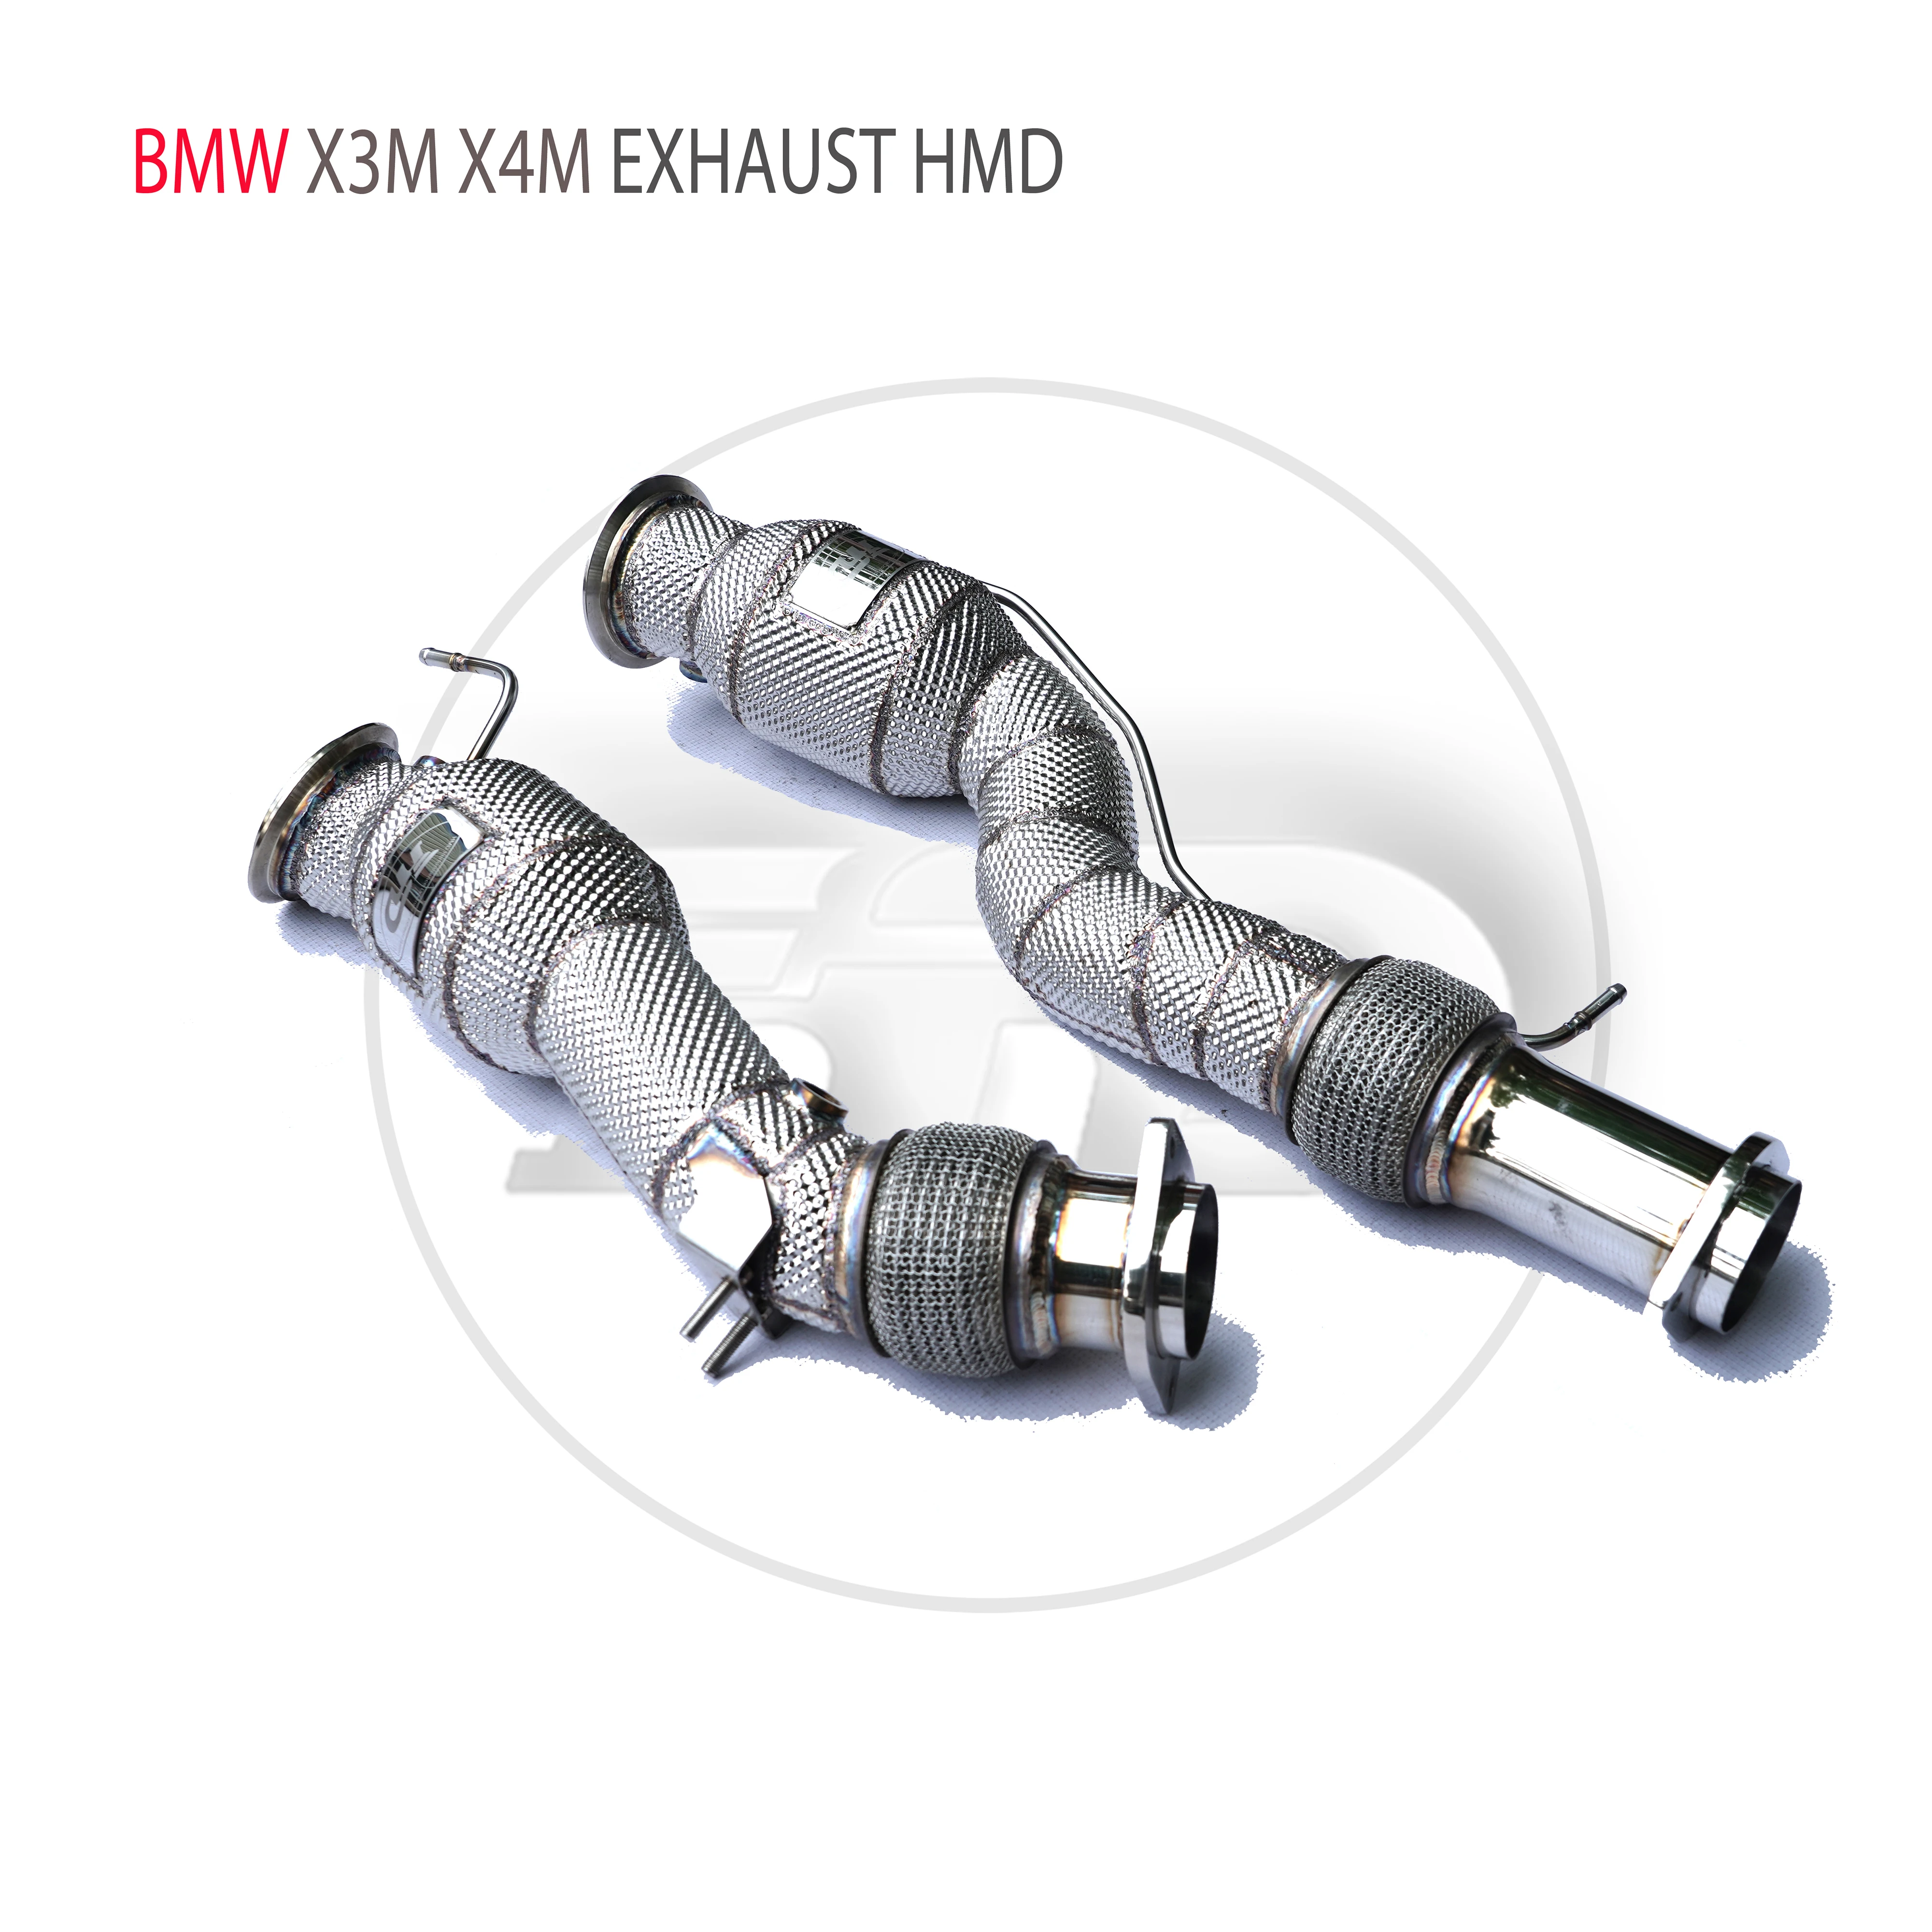 

HMD Car Accessories Exhaust System High Flow Performance Downpipe for BMW X3M X4M With Catalytic Converter